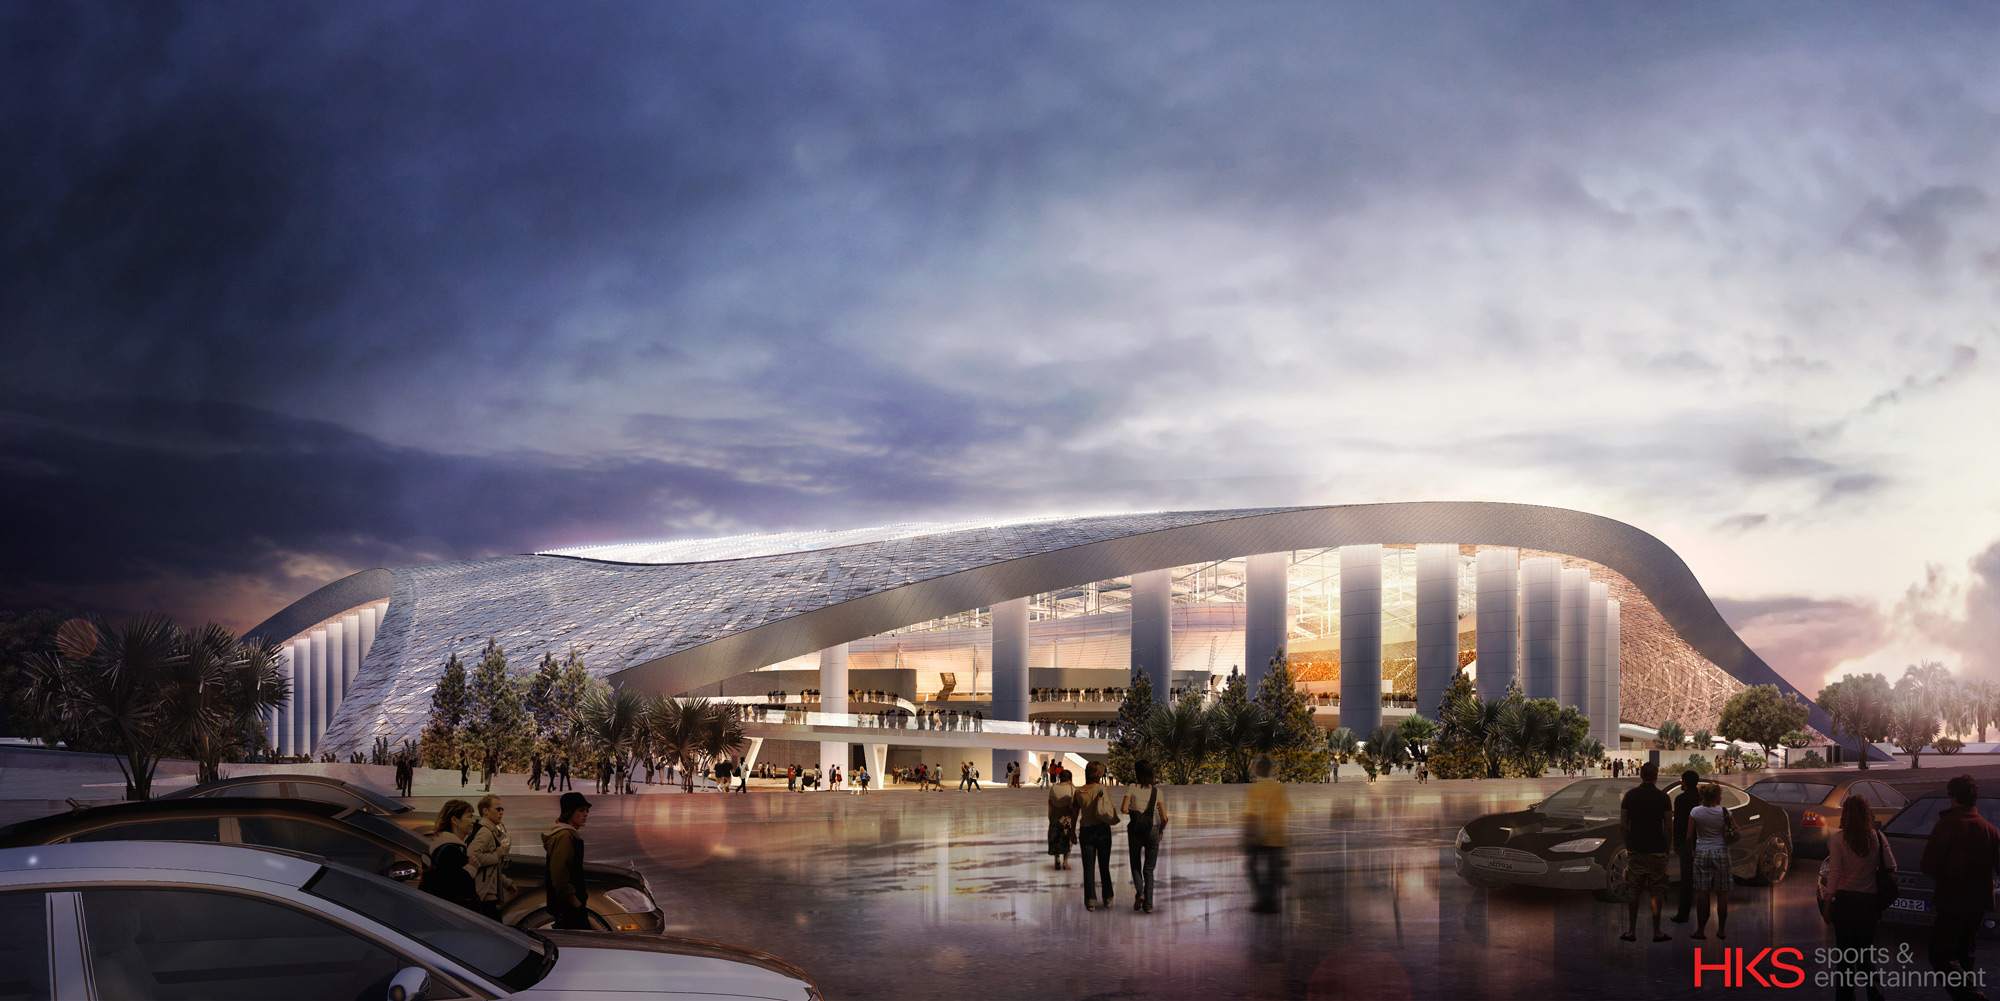 Four teams swap cities on the West Coast over new NFL stadiums - Archpaper.com2000 x 1001